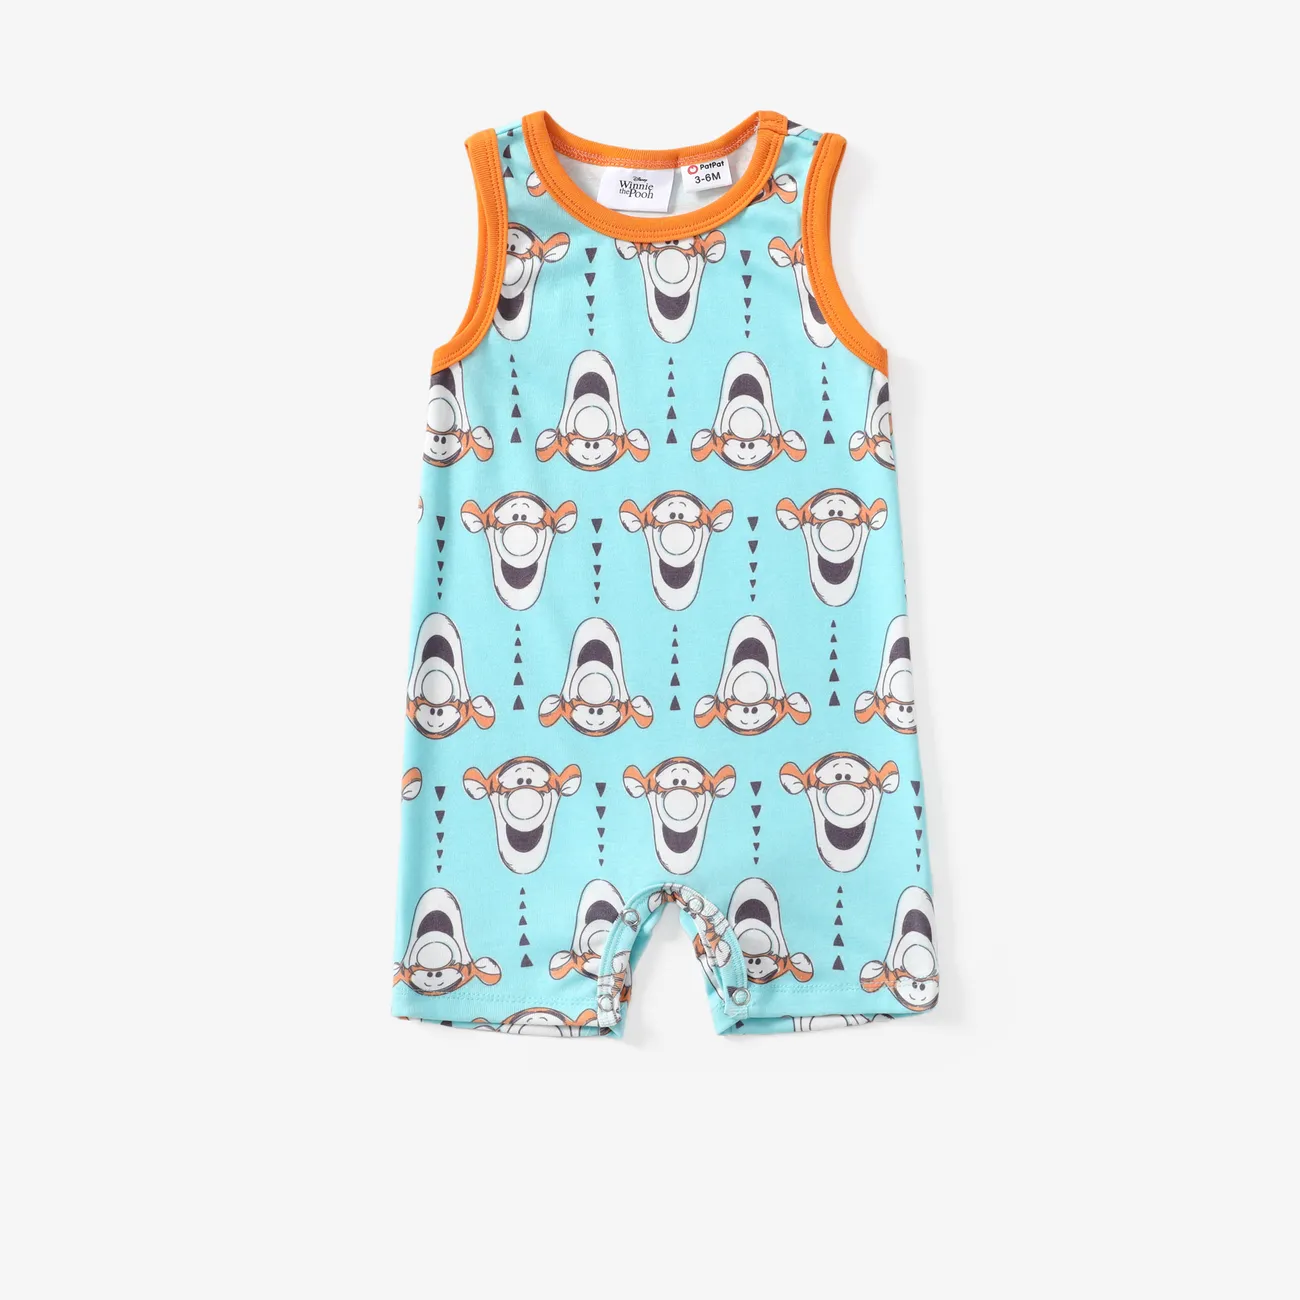 Disney Winnie the Pooh Baby Boys/Girls 1pc Naia™ Character All-over Print Short-sleeve Romper BlueGreen big image 1